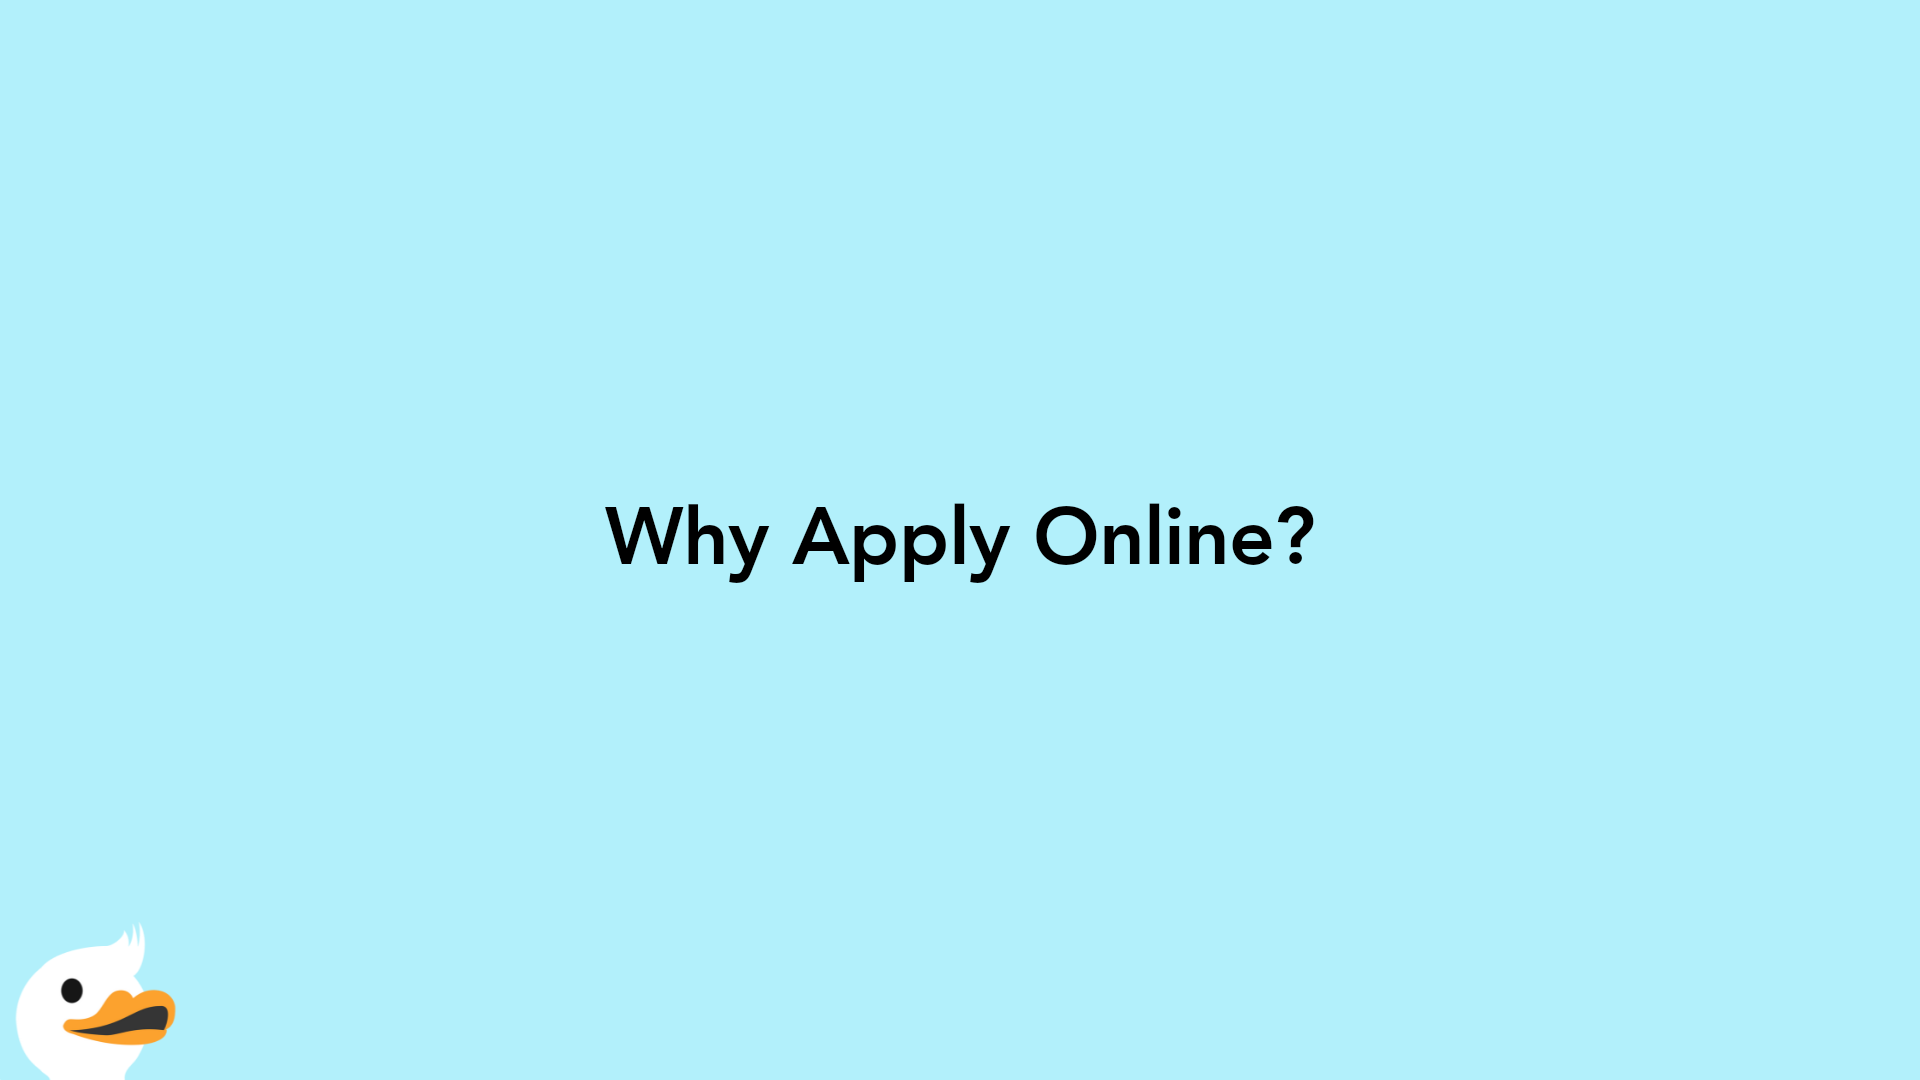 Why Apply Online?